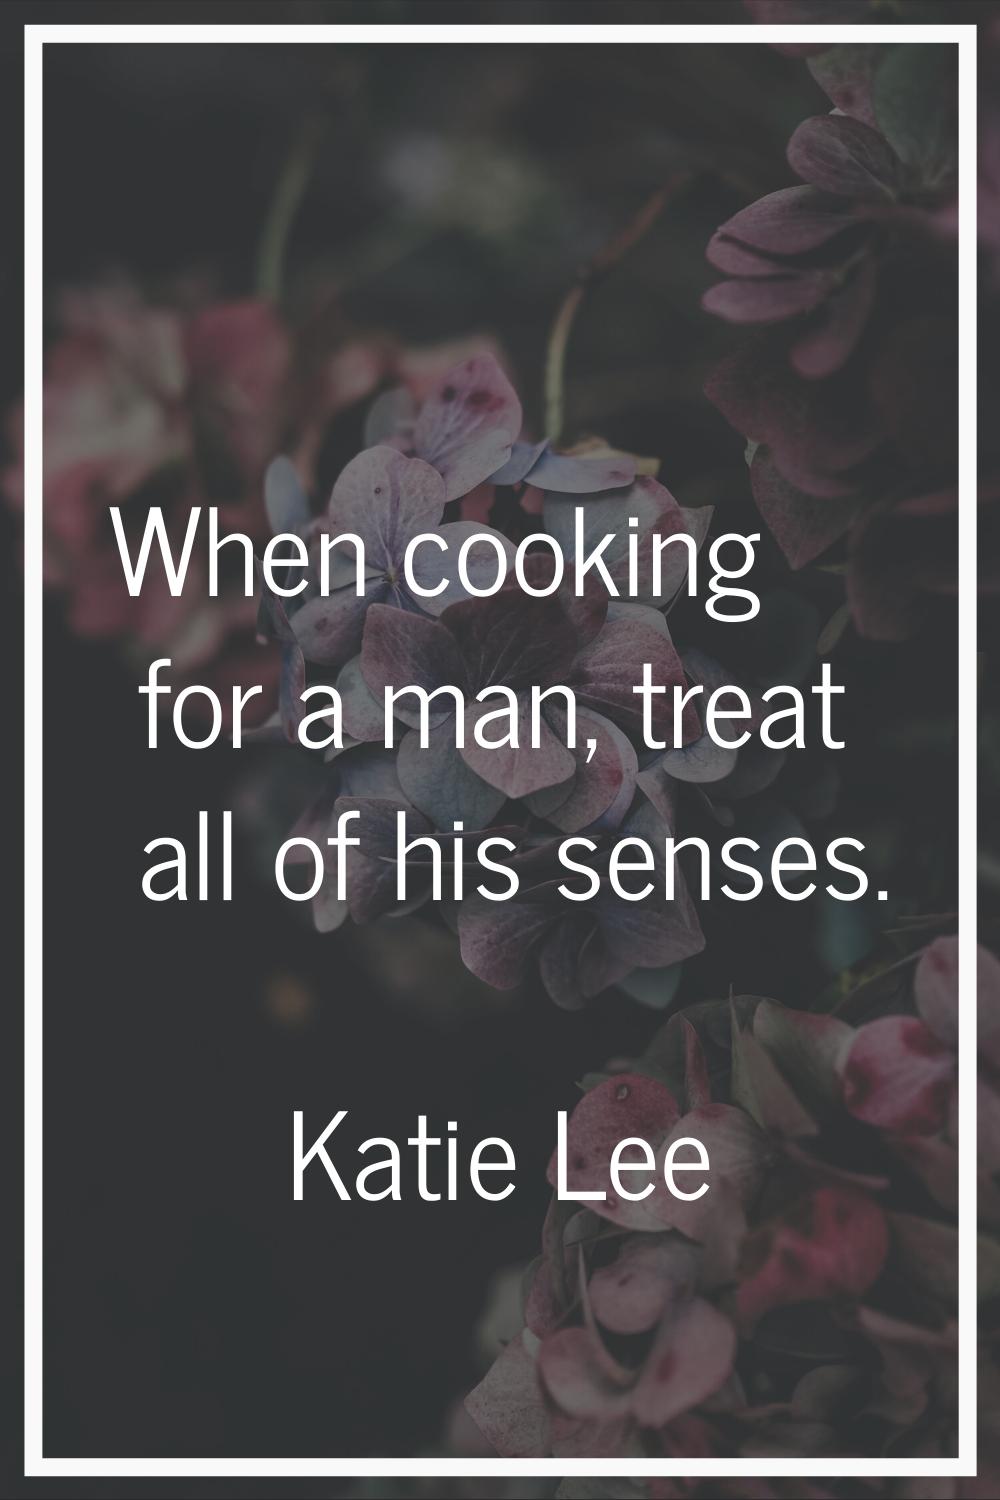 When cooking for a man, treat all of his senses.